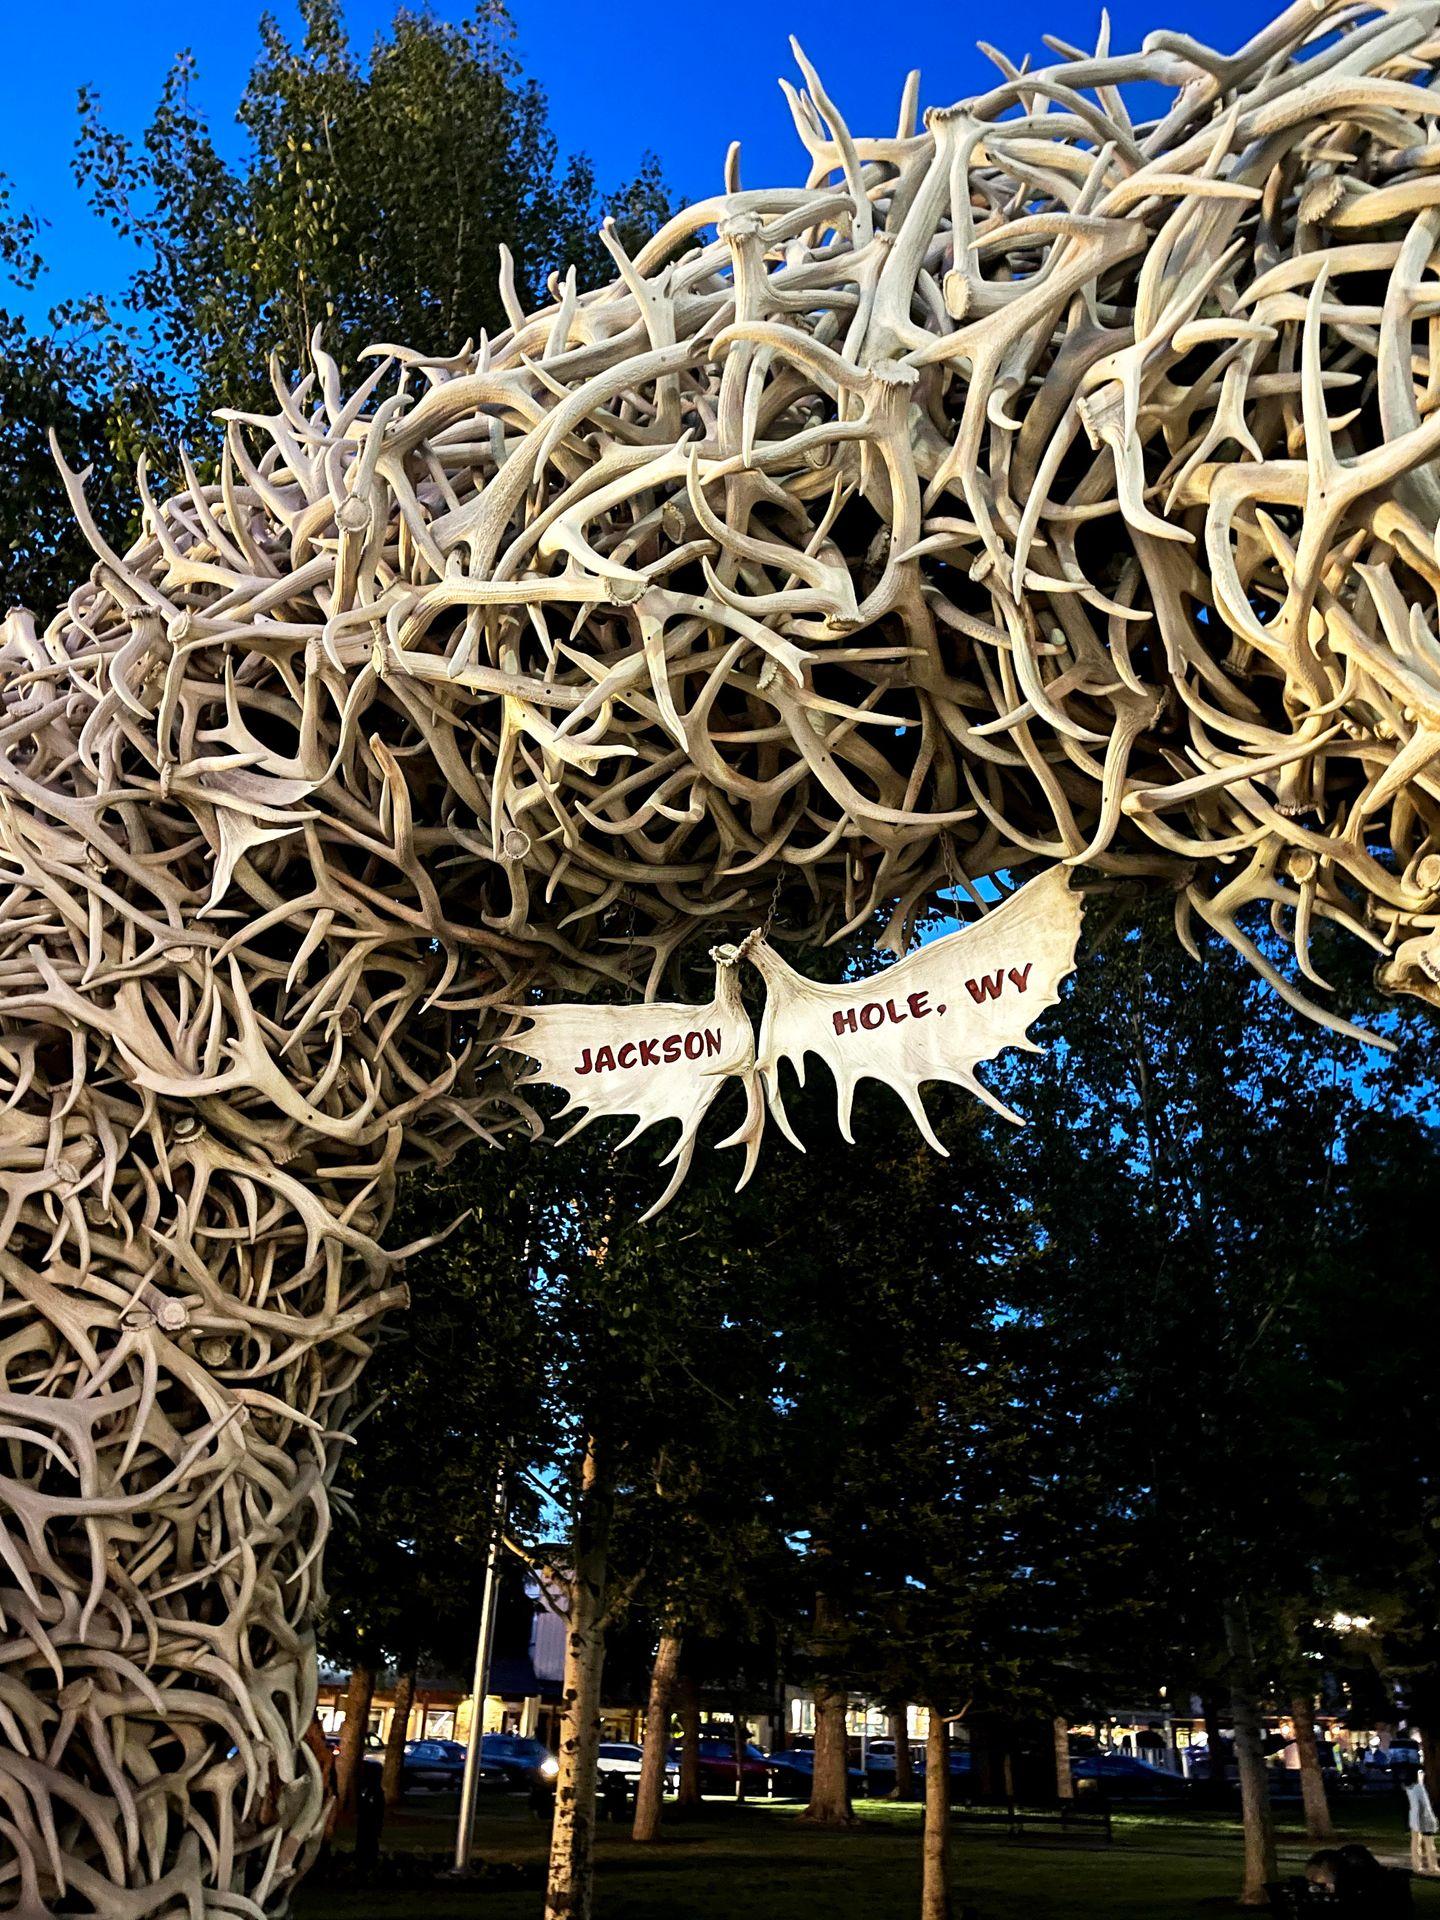 An archway made out of antlers at Jackson Square.